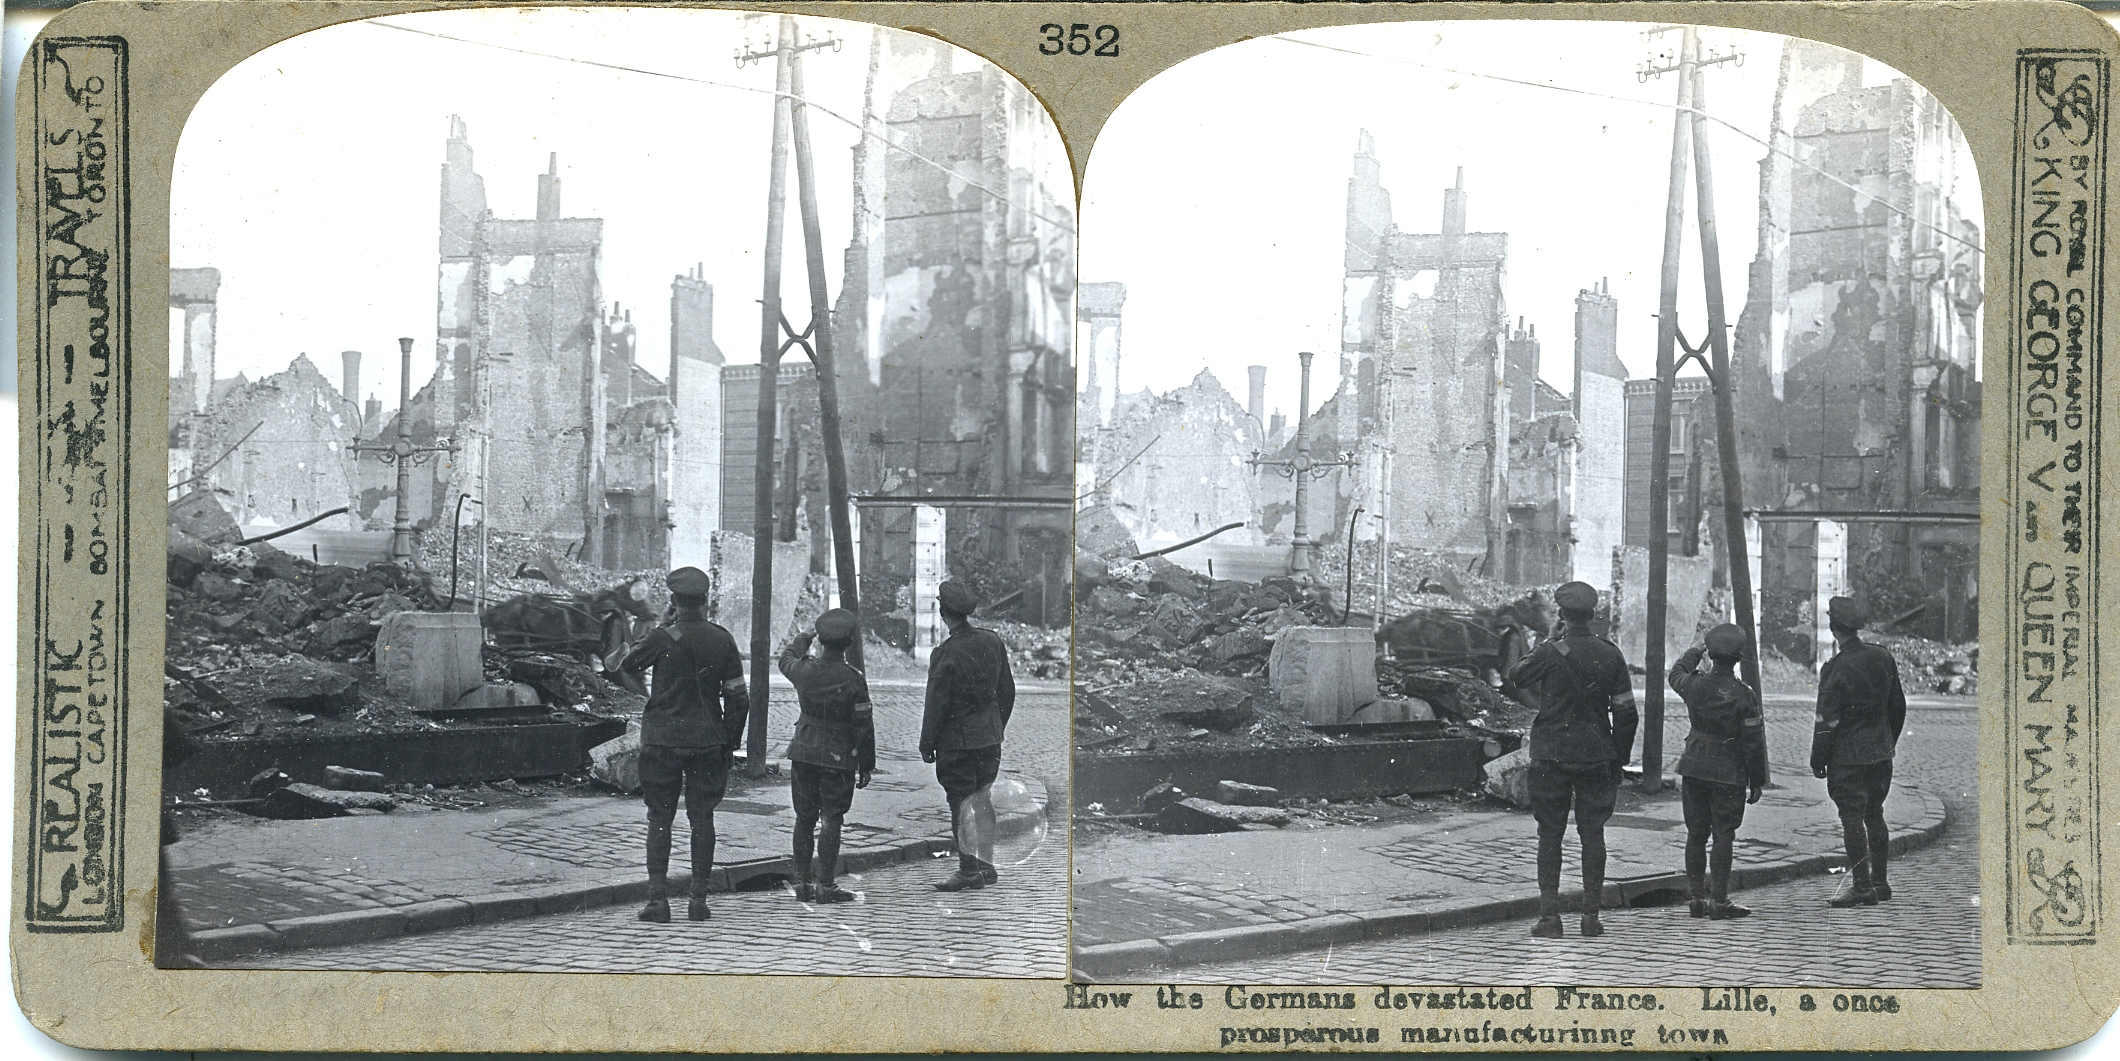 How the Germans devastated France. Lille, a once prosperous manufacturing town